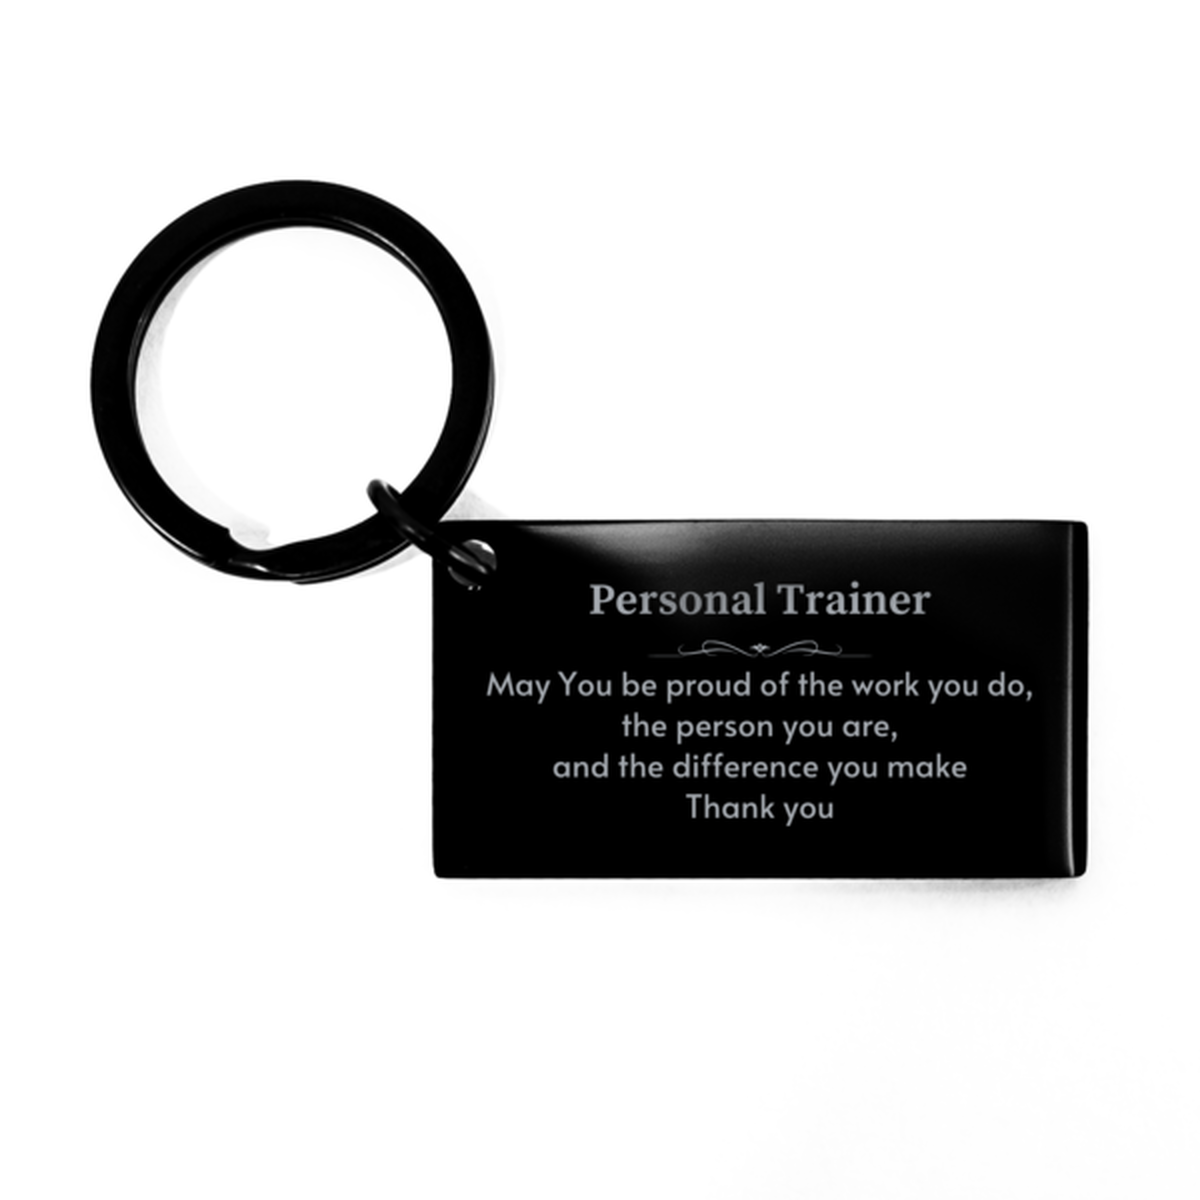 Heartwarming Keychain Retirement Coworkers Gifts for Personal Trainer, Reporter May You be proud of the work you do, the person you are Gifts for Boss Men Women Friends